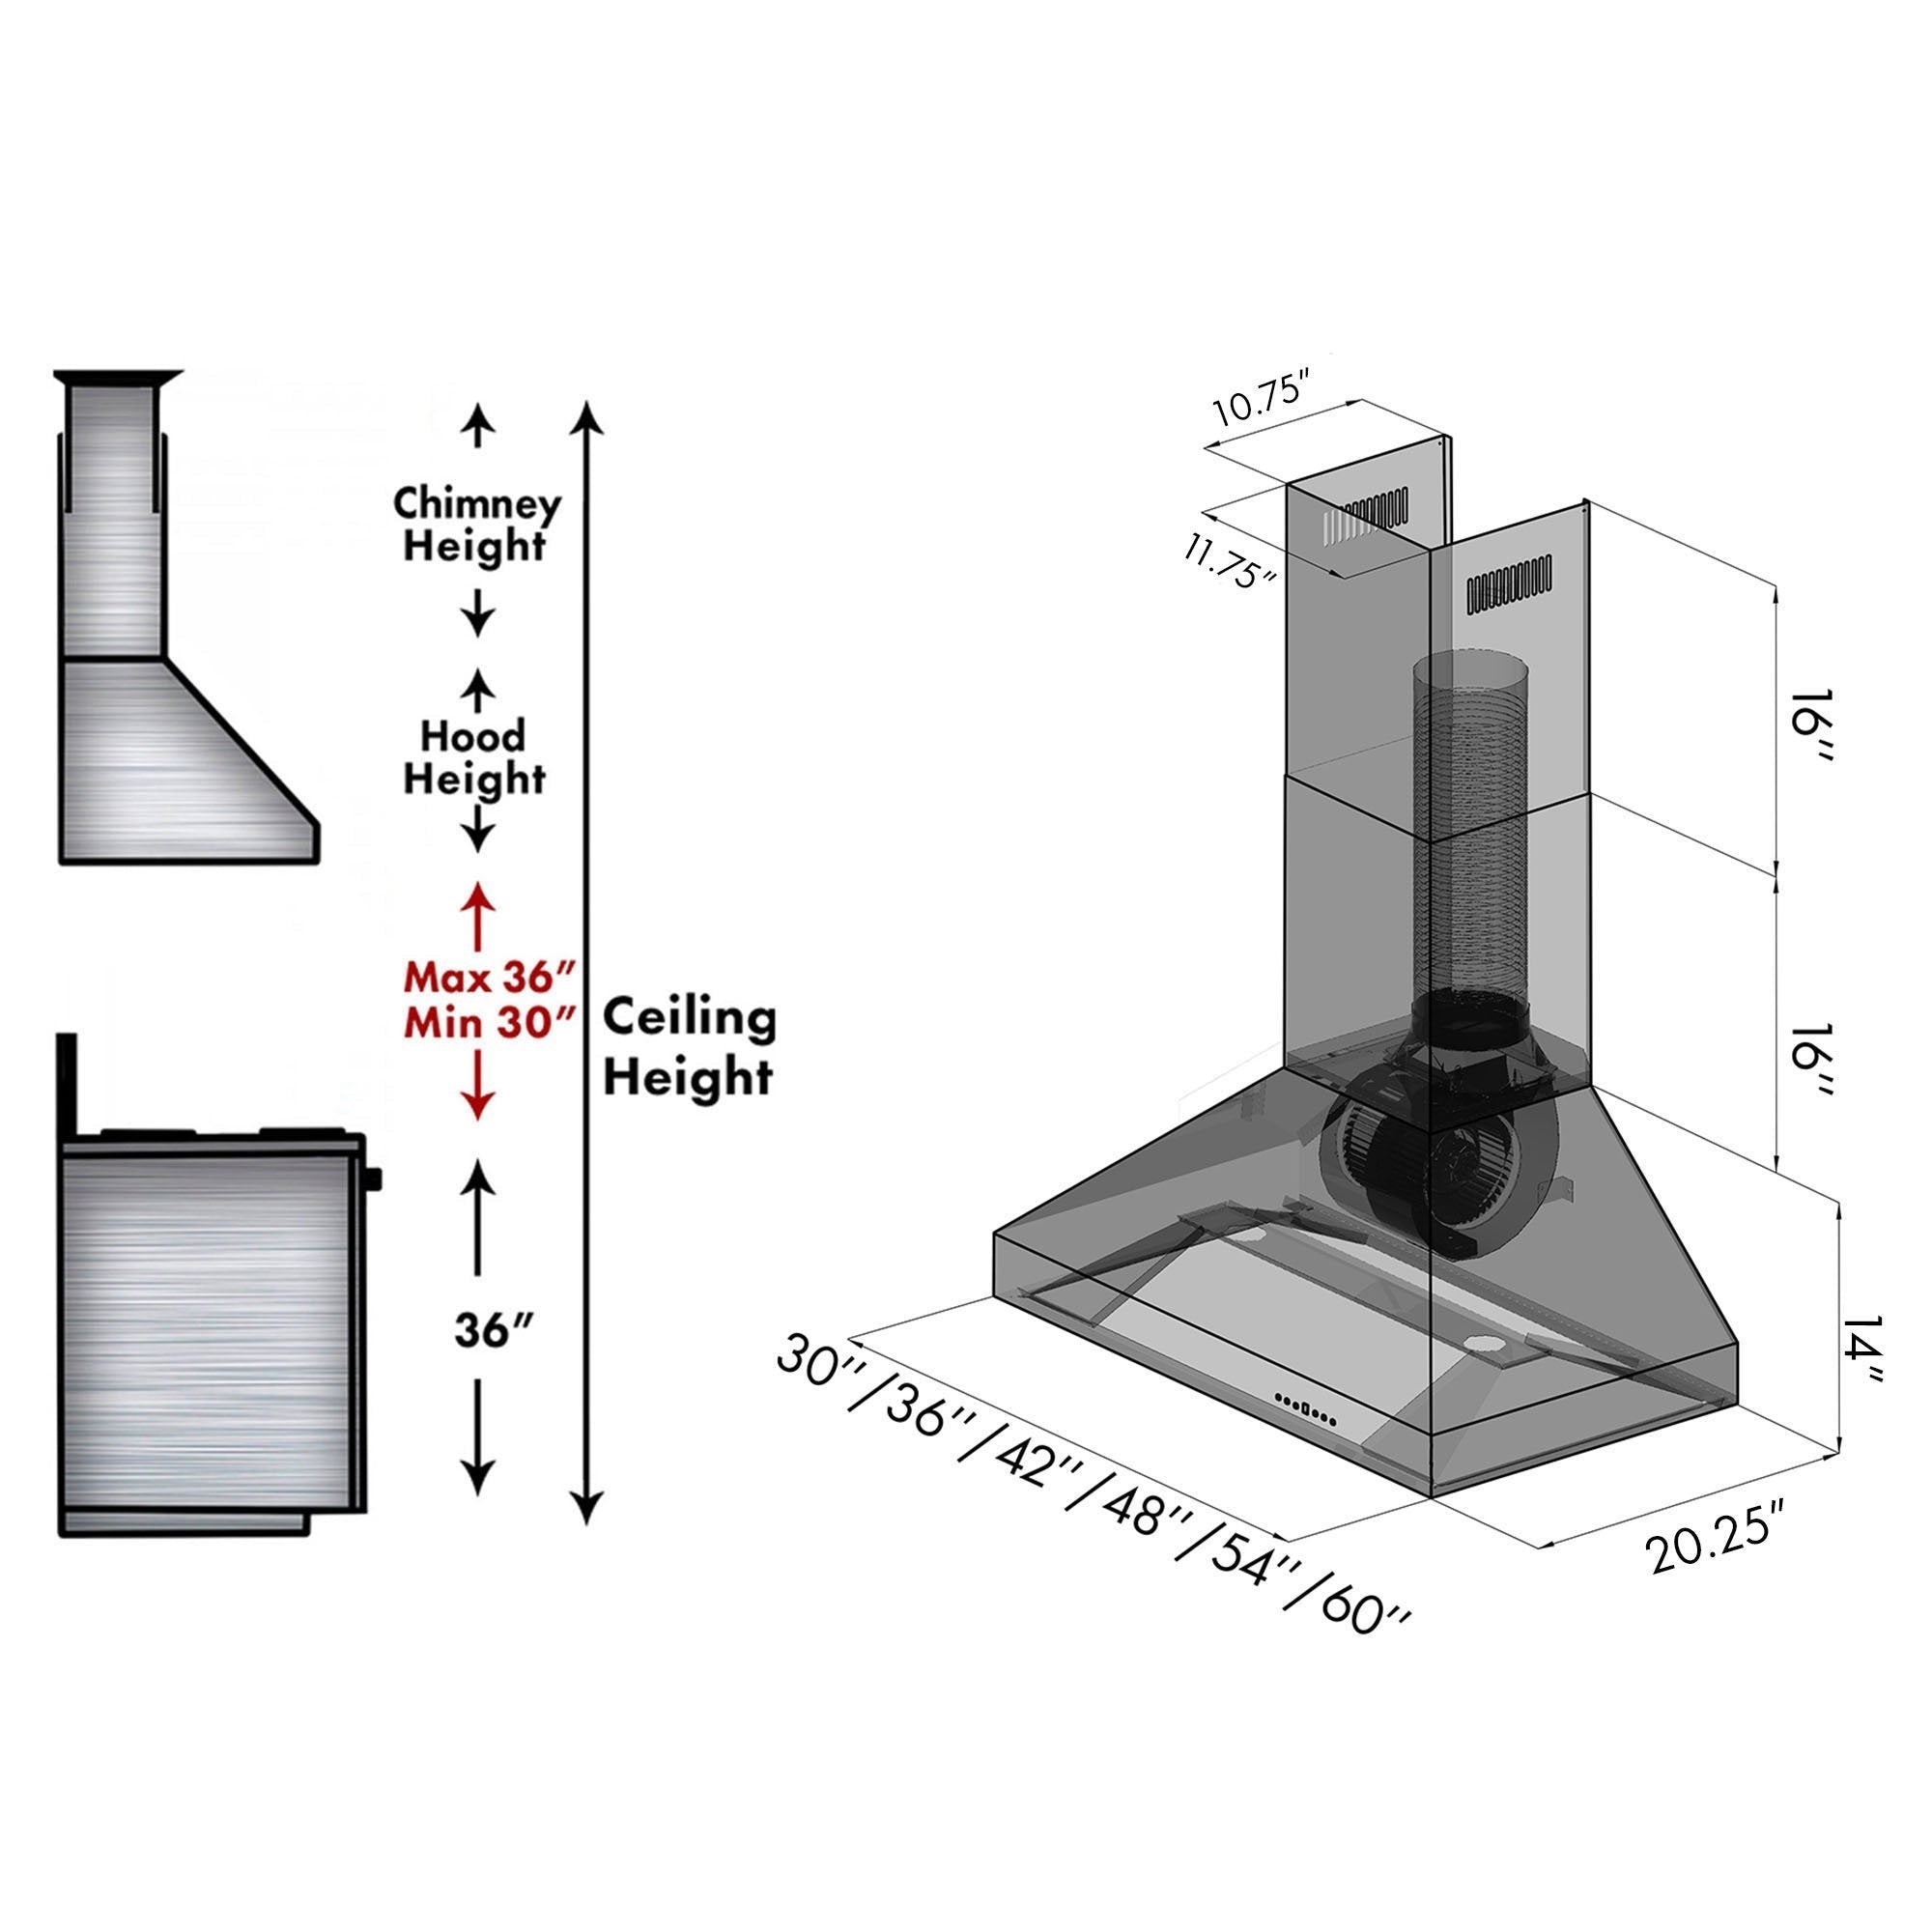 ZLINE Outdoor Wall Mount Range Hood in Stainless Steel (597-304) dimensions and chimney height guide.